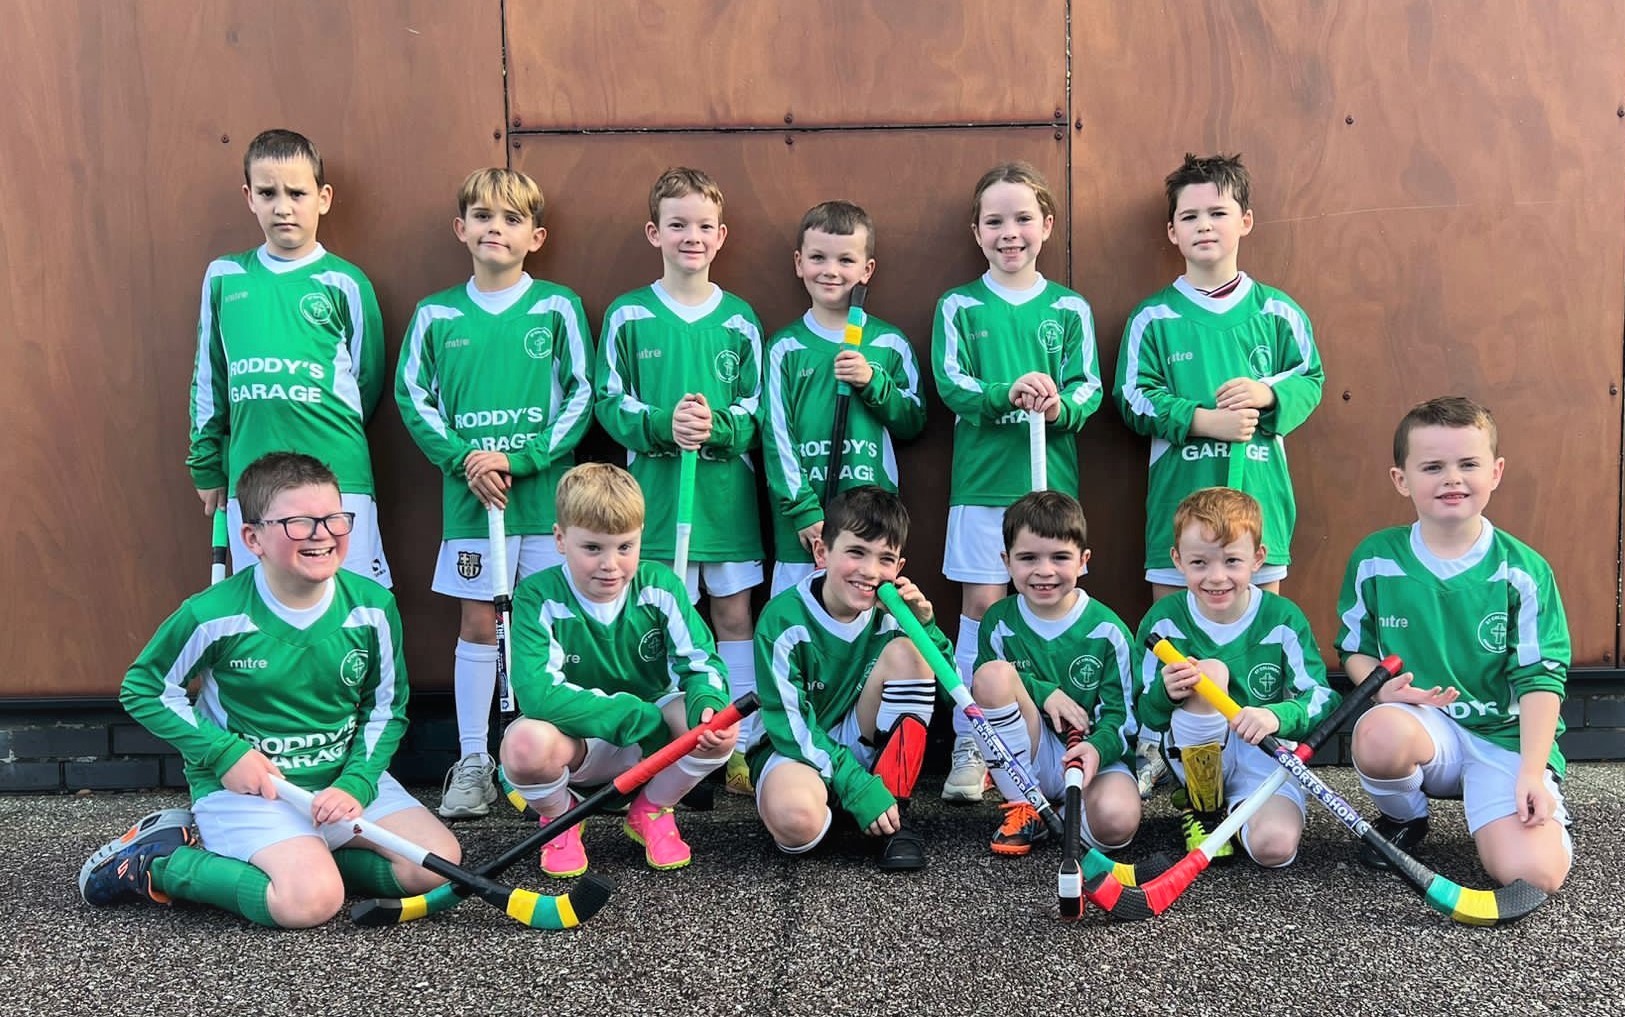 School shinty club re-established thanks to Link in the Community funding